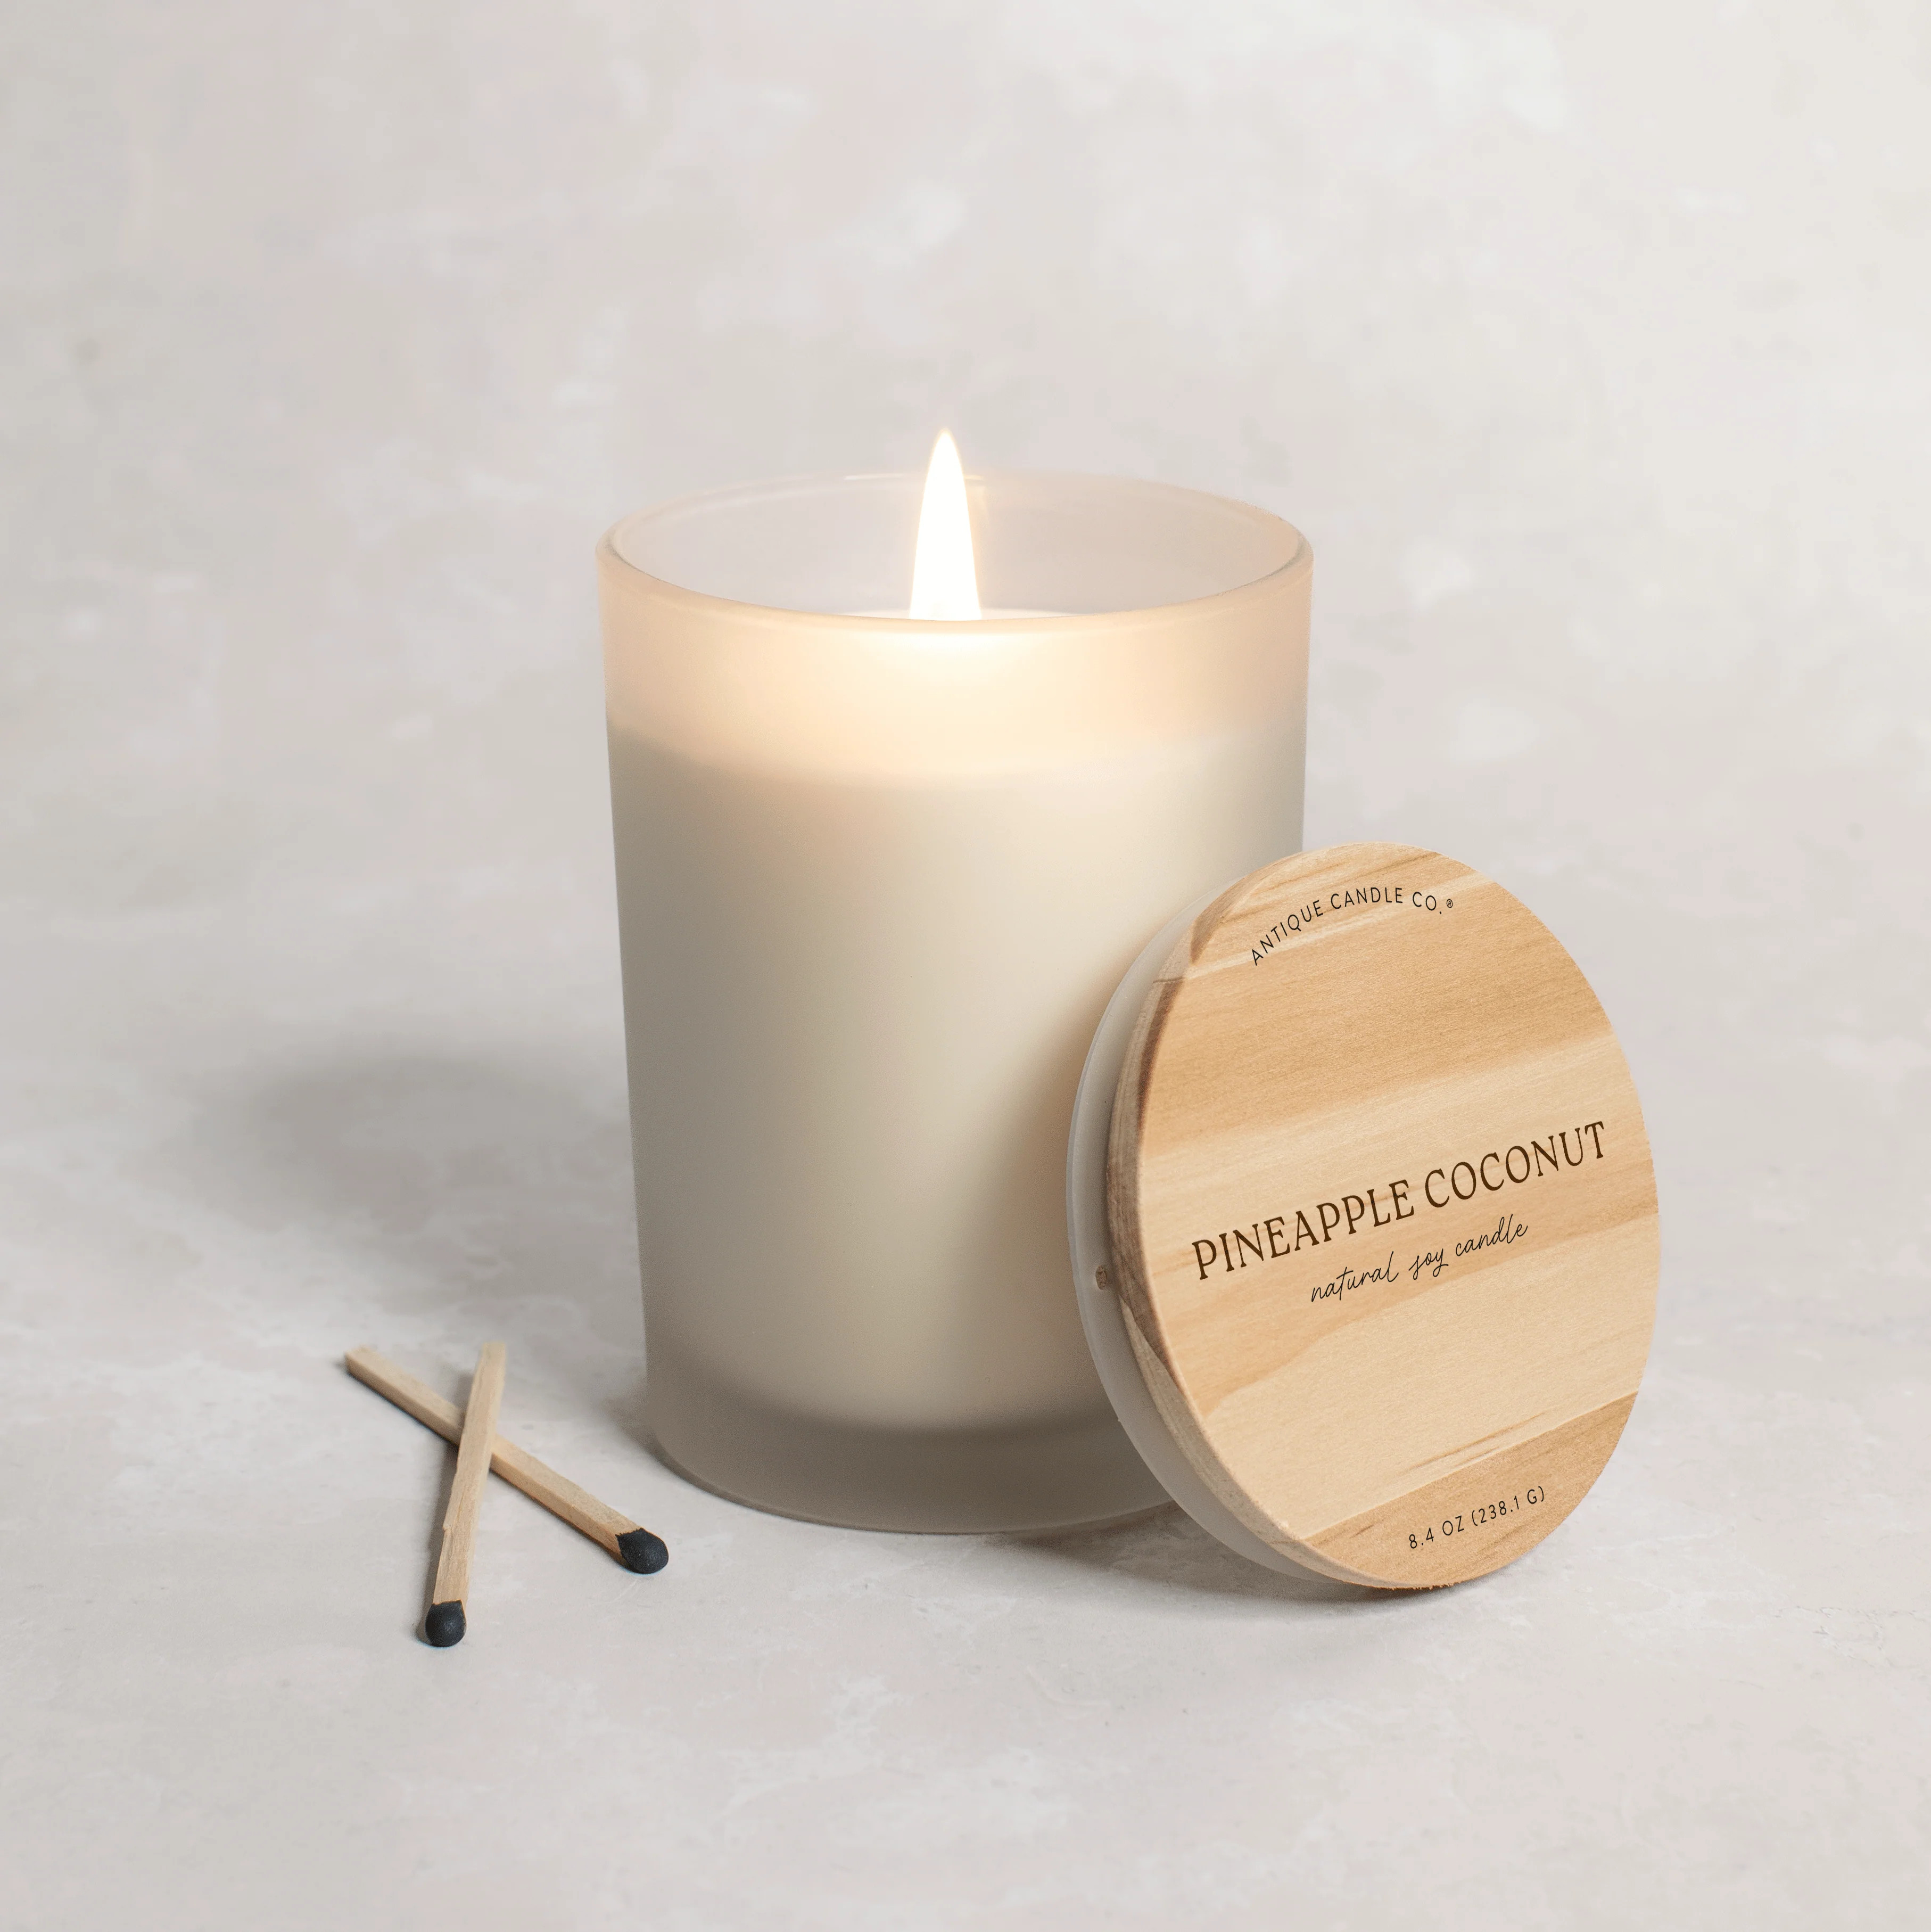 Pineapple Coconut Luxe Candle | Antique Candle Co.